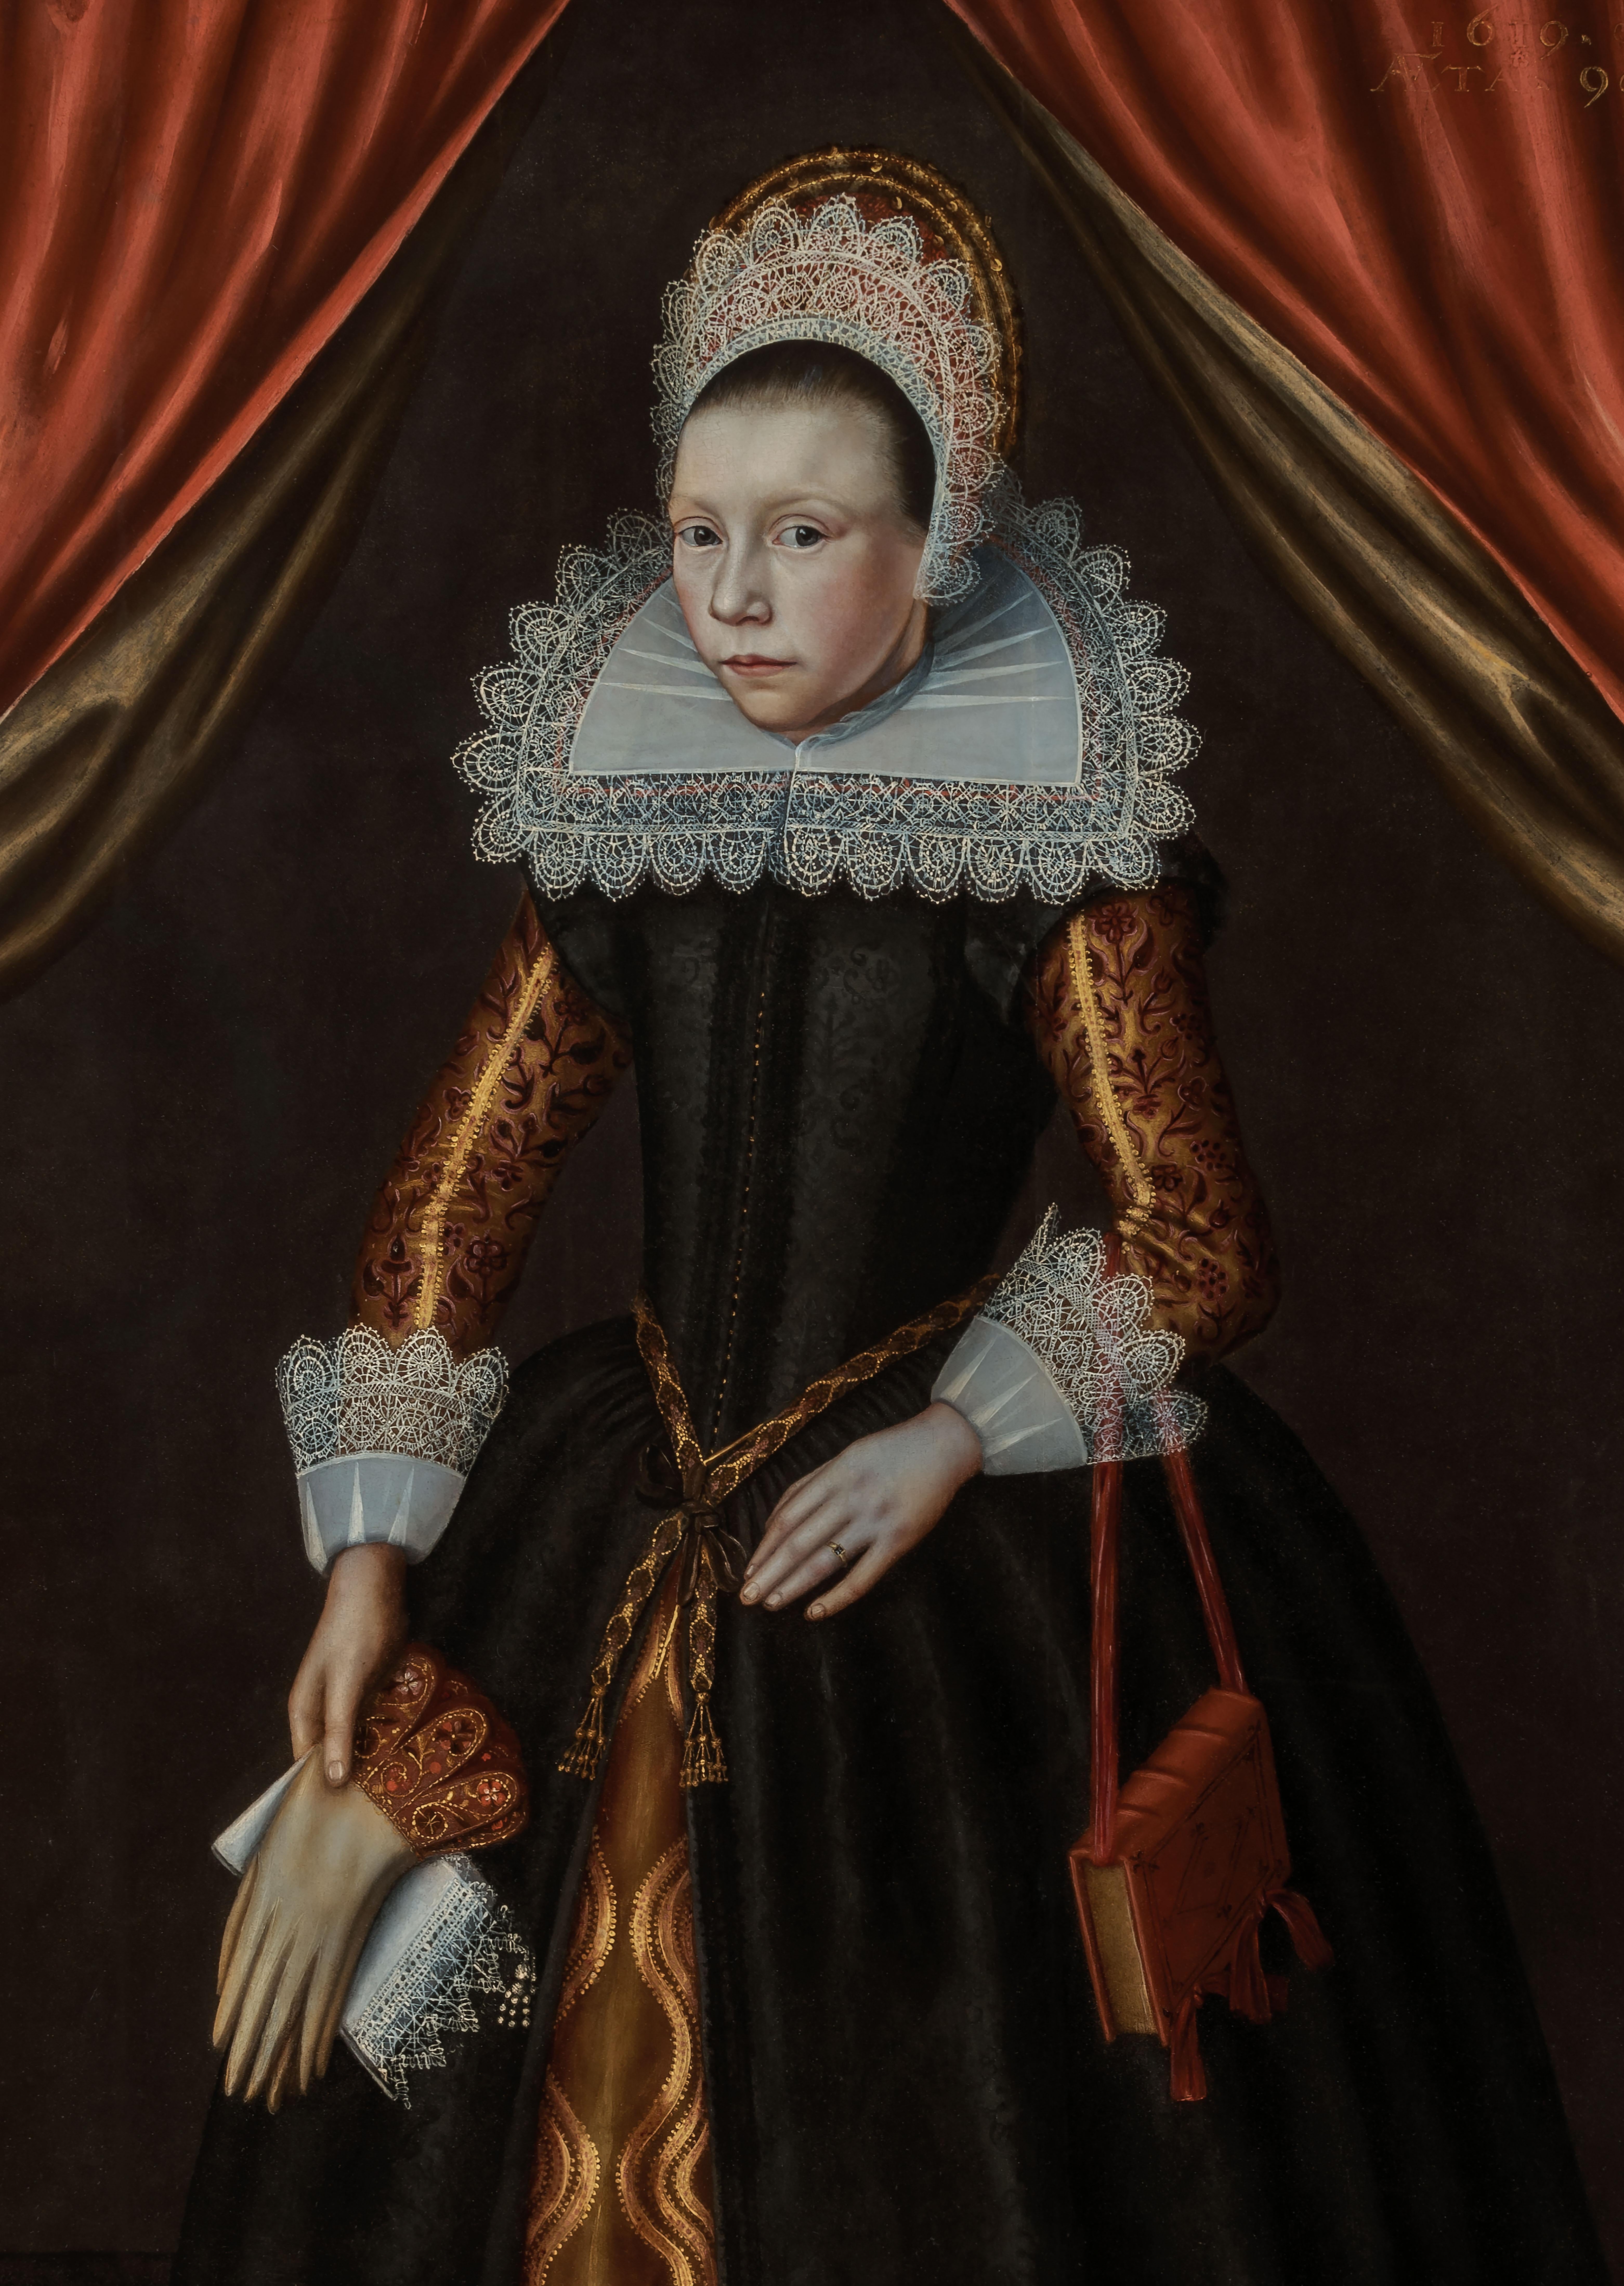 Portrait of a Noble Young Girl, aged 9, in a black dress with lace ruff and cuffs, Dated 1619 
Circle of Cornelis van der Voort (1576- 1624)
Oil on cradled panel

Presented by Titan Fine Art, this exquisite full-length portrait depicts a young lady